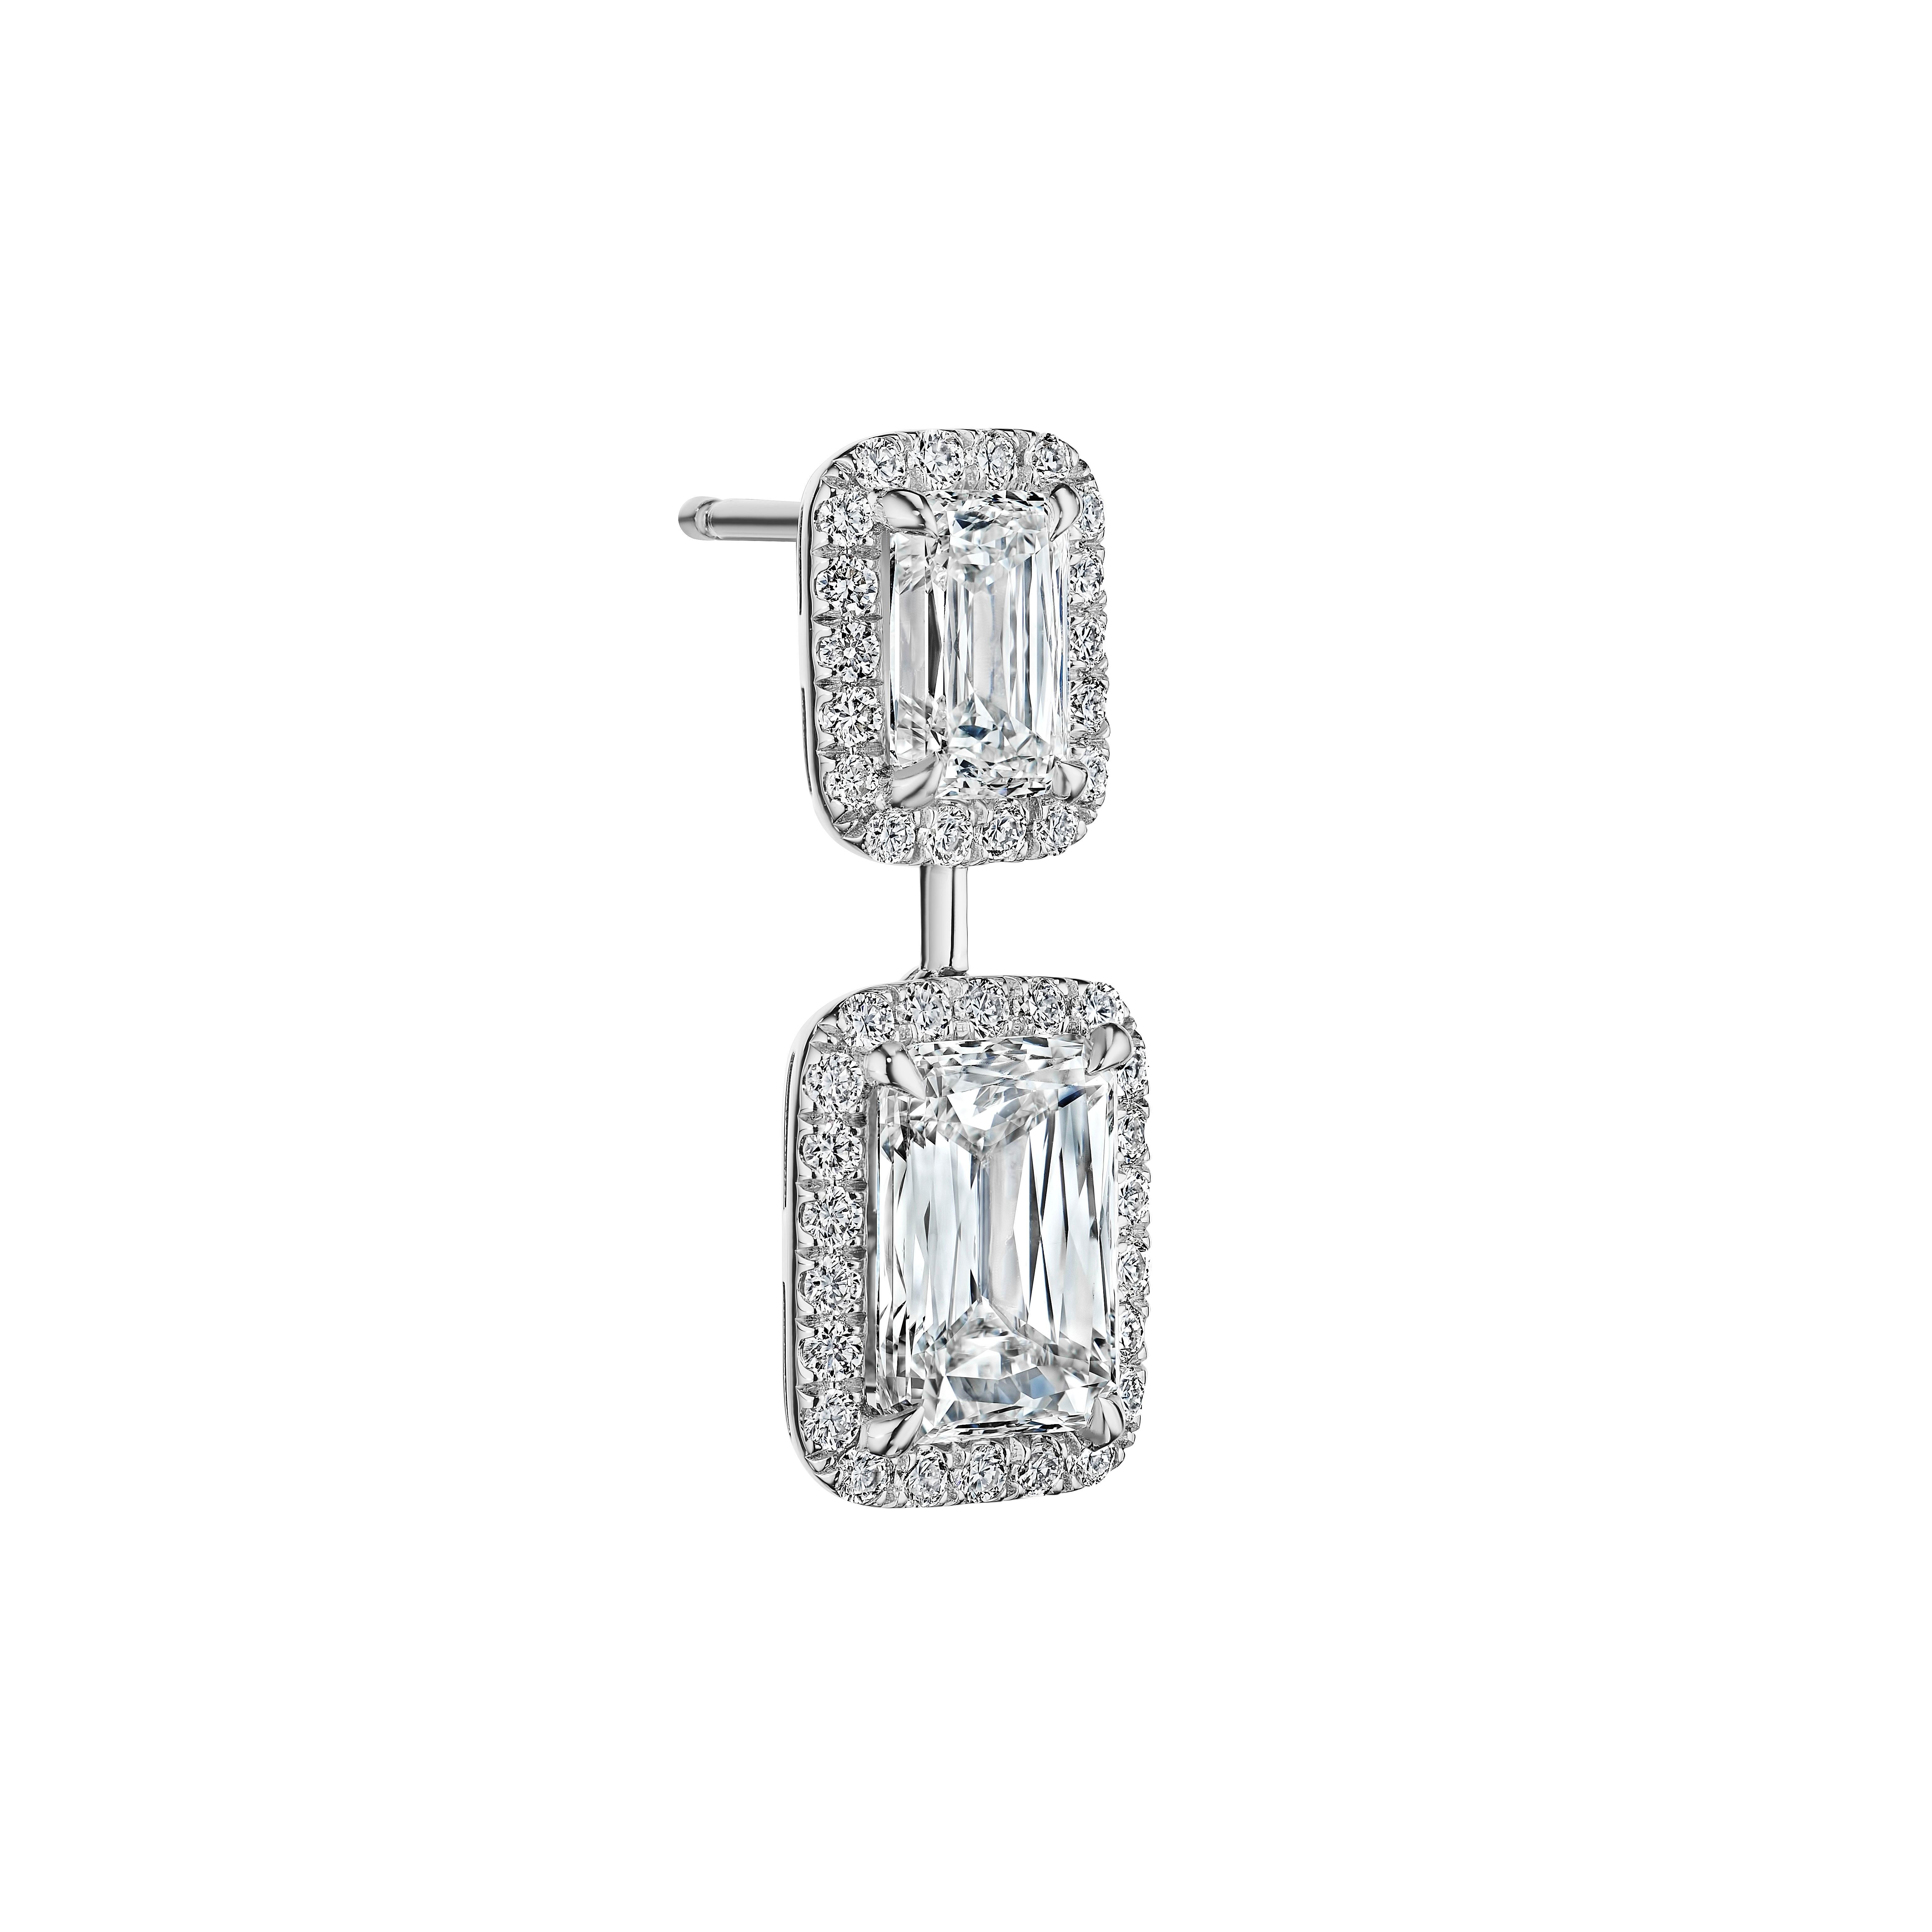 GIA Certified 5.00ct Modified Emerald Cut Diamond Earrings in 18KT White Gold In New Condition For Sale In New York, NY